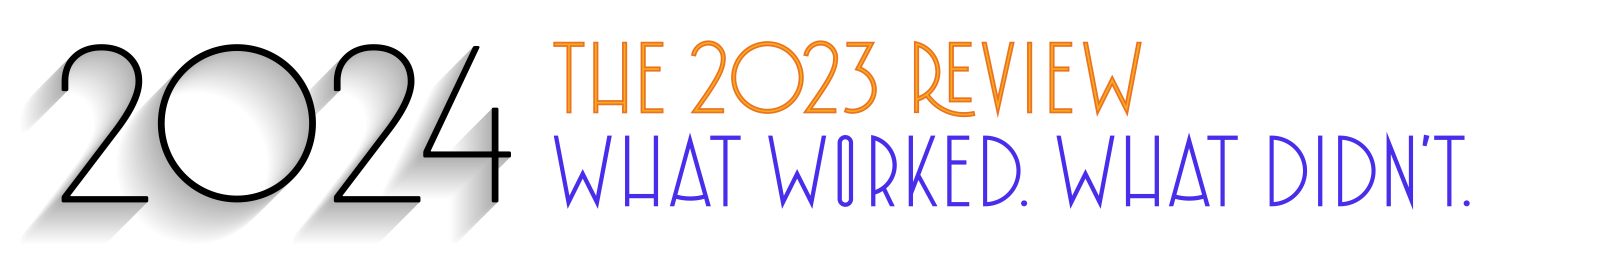 2024, A LOOK AT THE YEAR